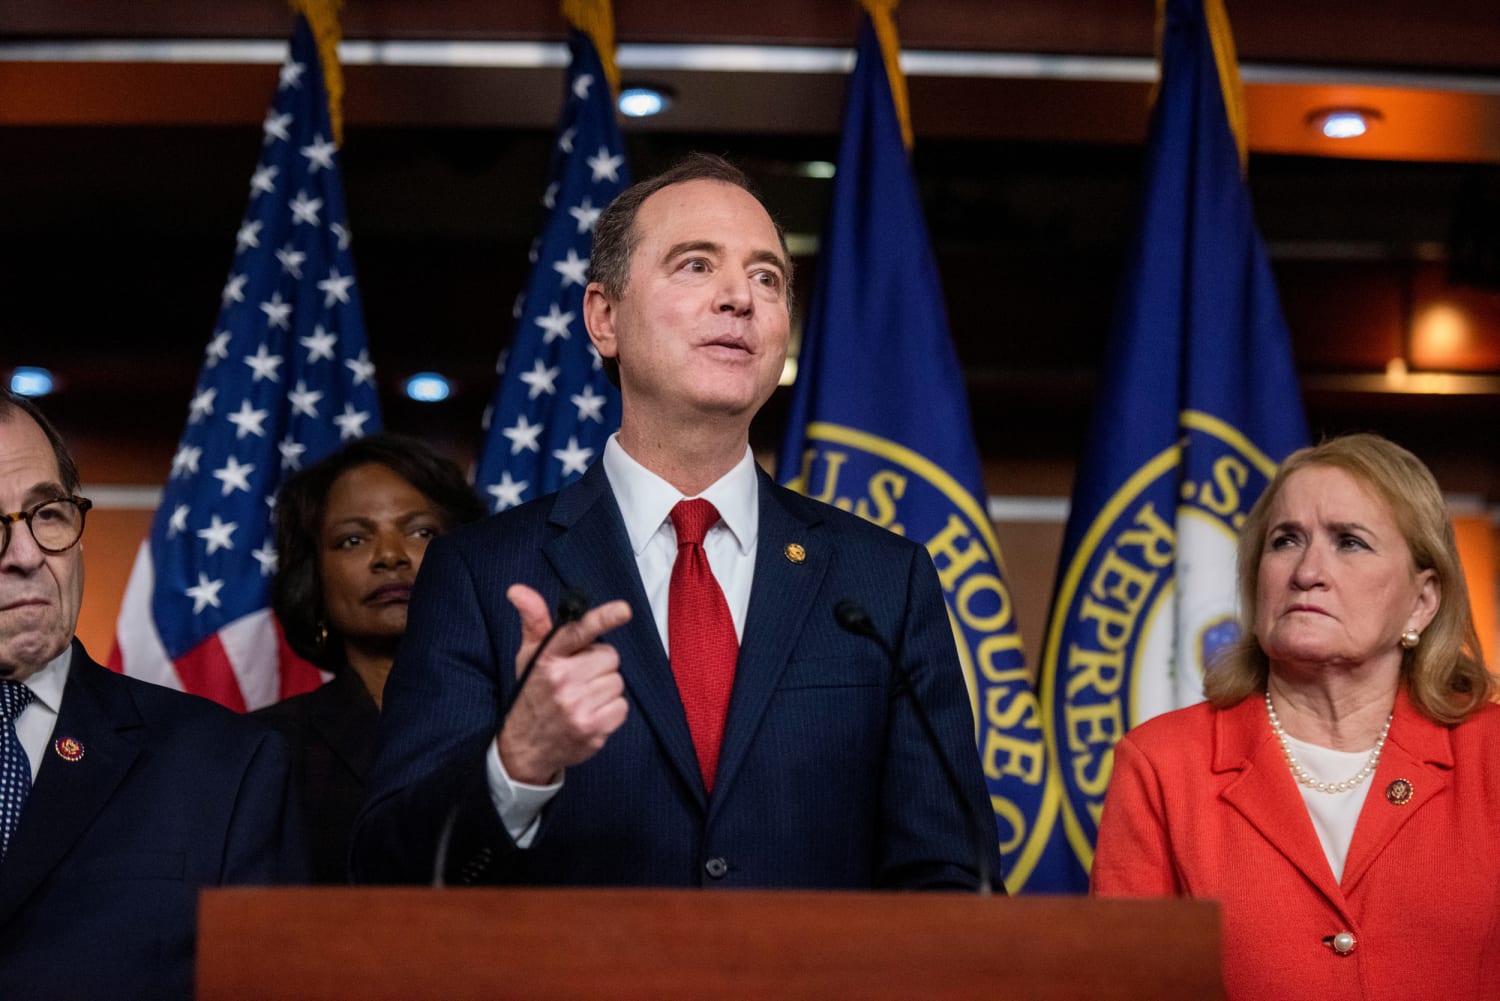 Schiff Congress could be target of foreign disinformation effort to influence 2020 election